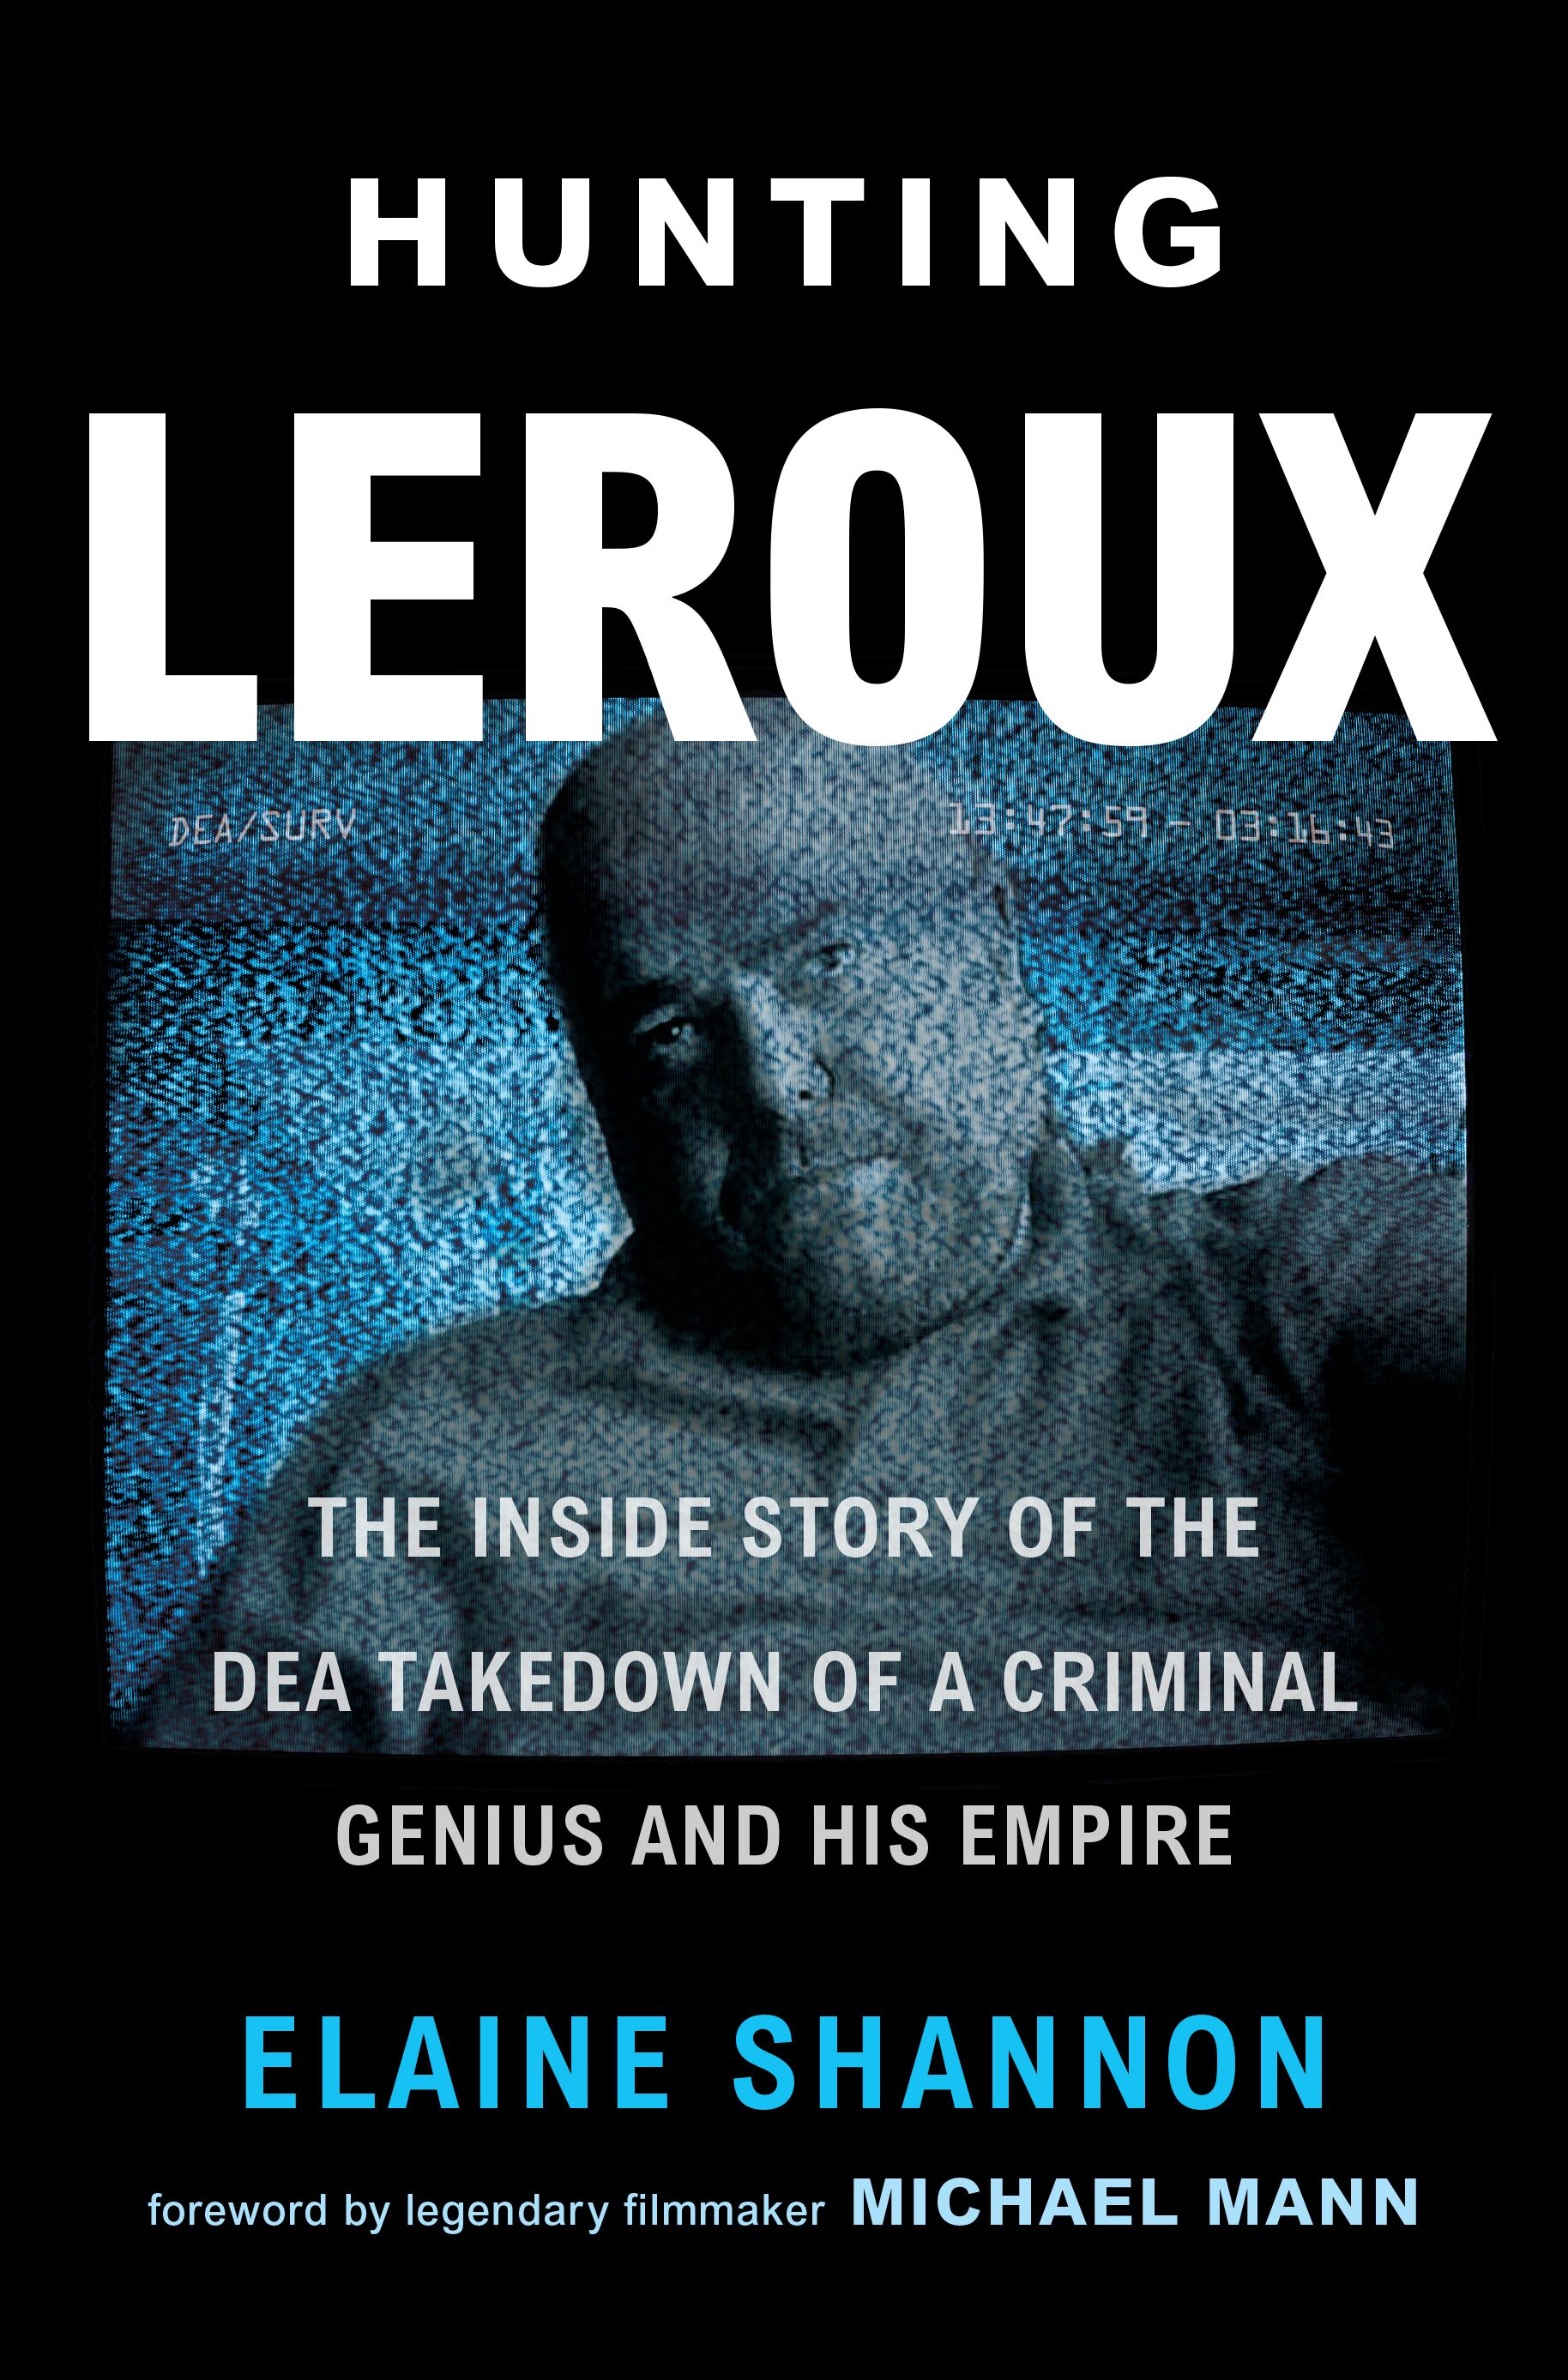 "Hunting LeRoux: The Inside Story of the DEA Takedown of a Criminal Genius and His Empire" by Elaine Shannon